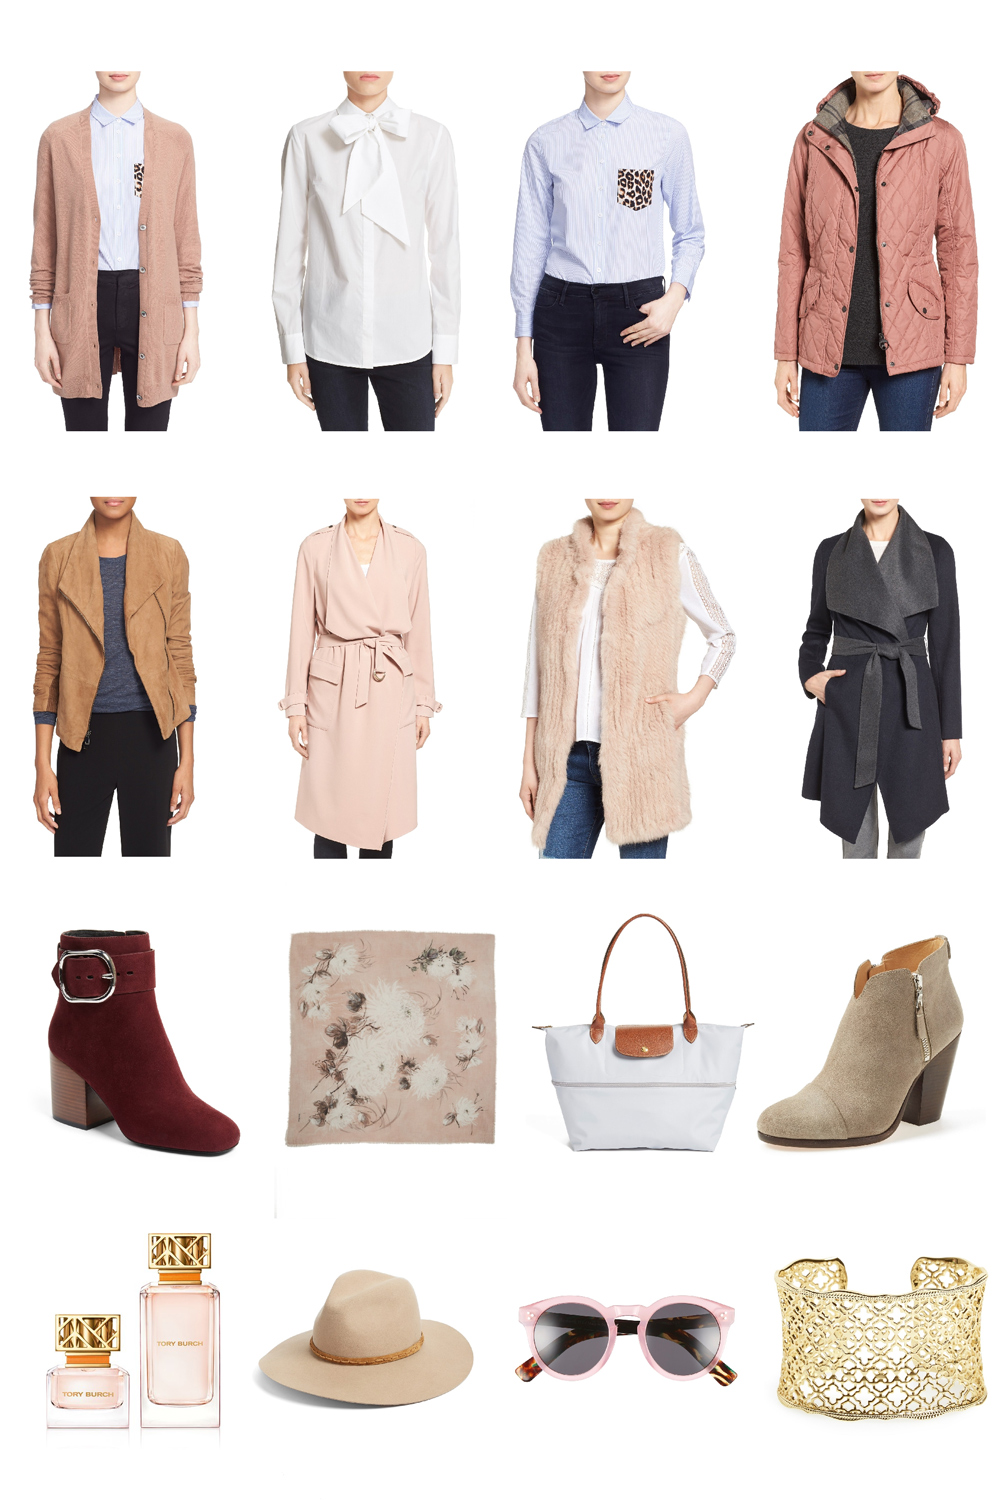 Nordstrom Anniversary Sale 2016 fashion blogger favorite picks and selects what to buy